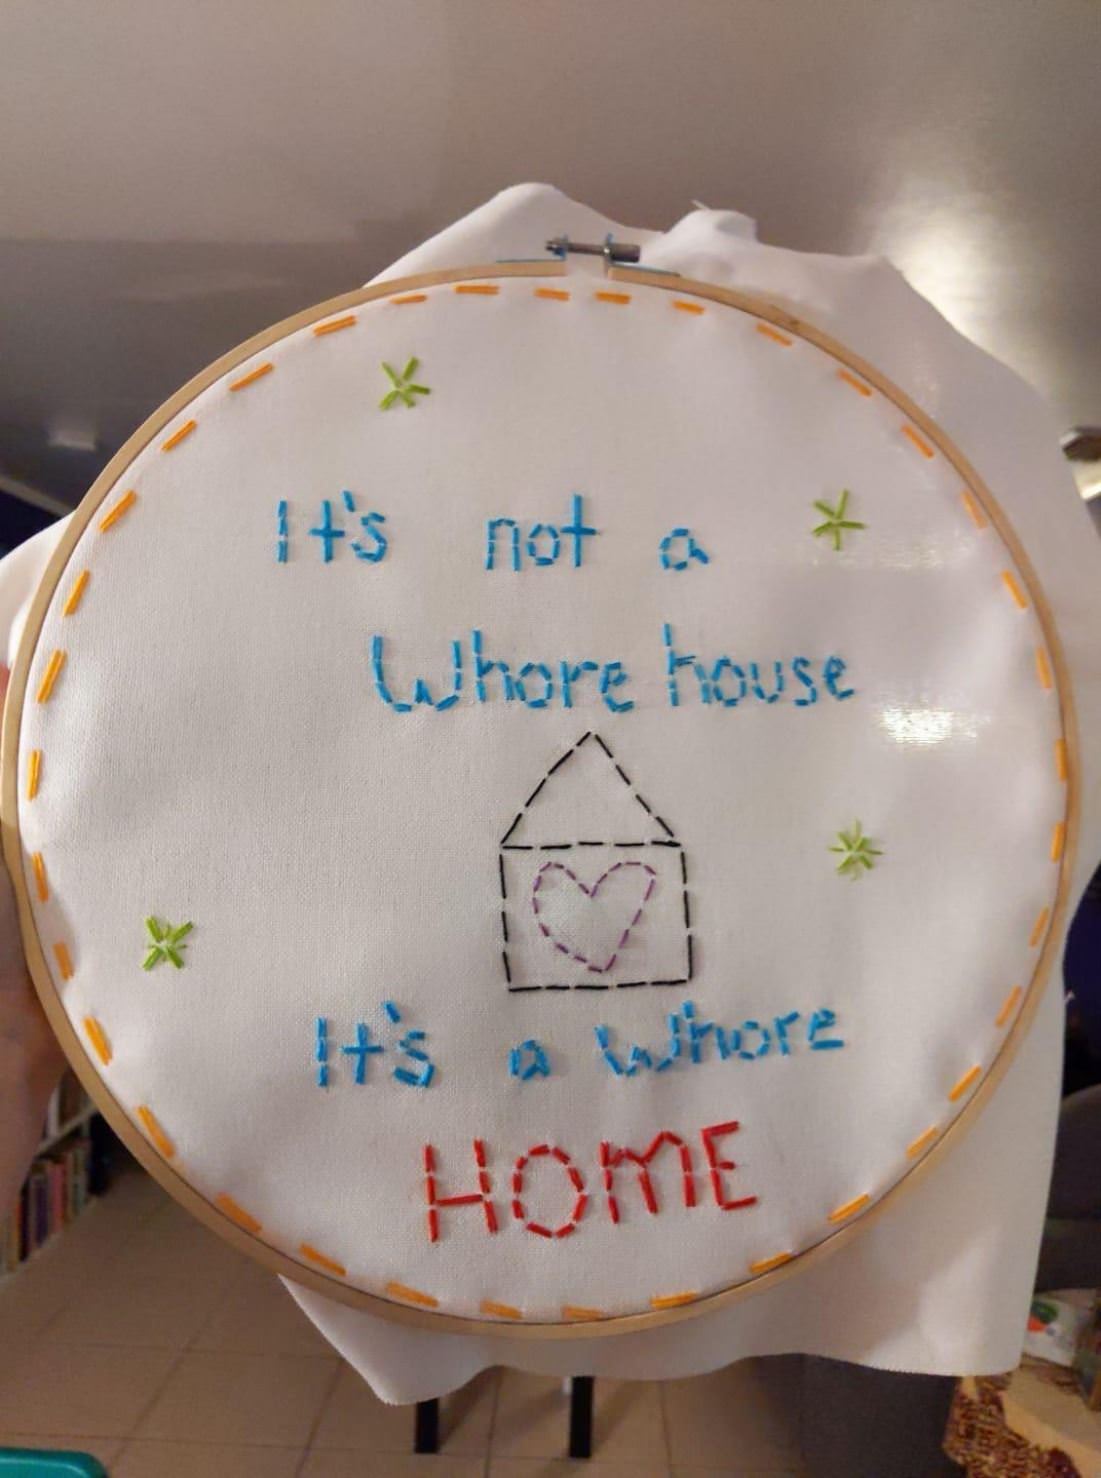 Not A Whore House